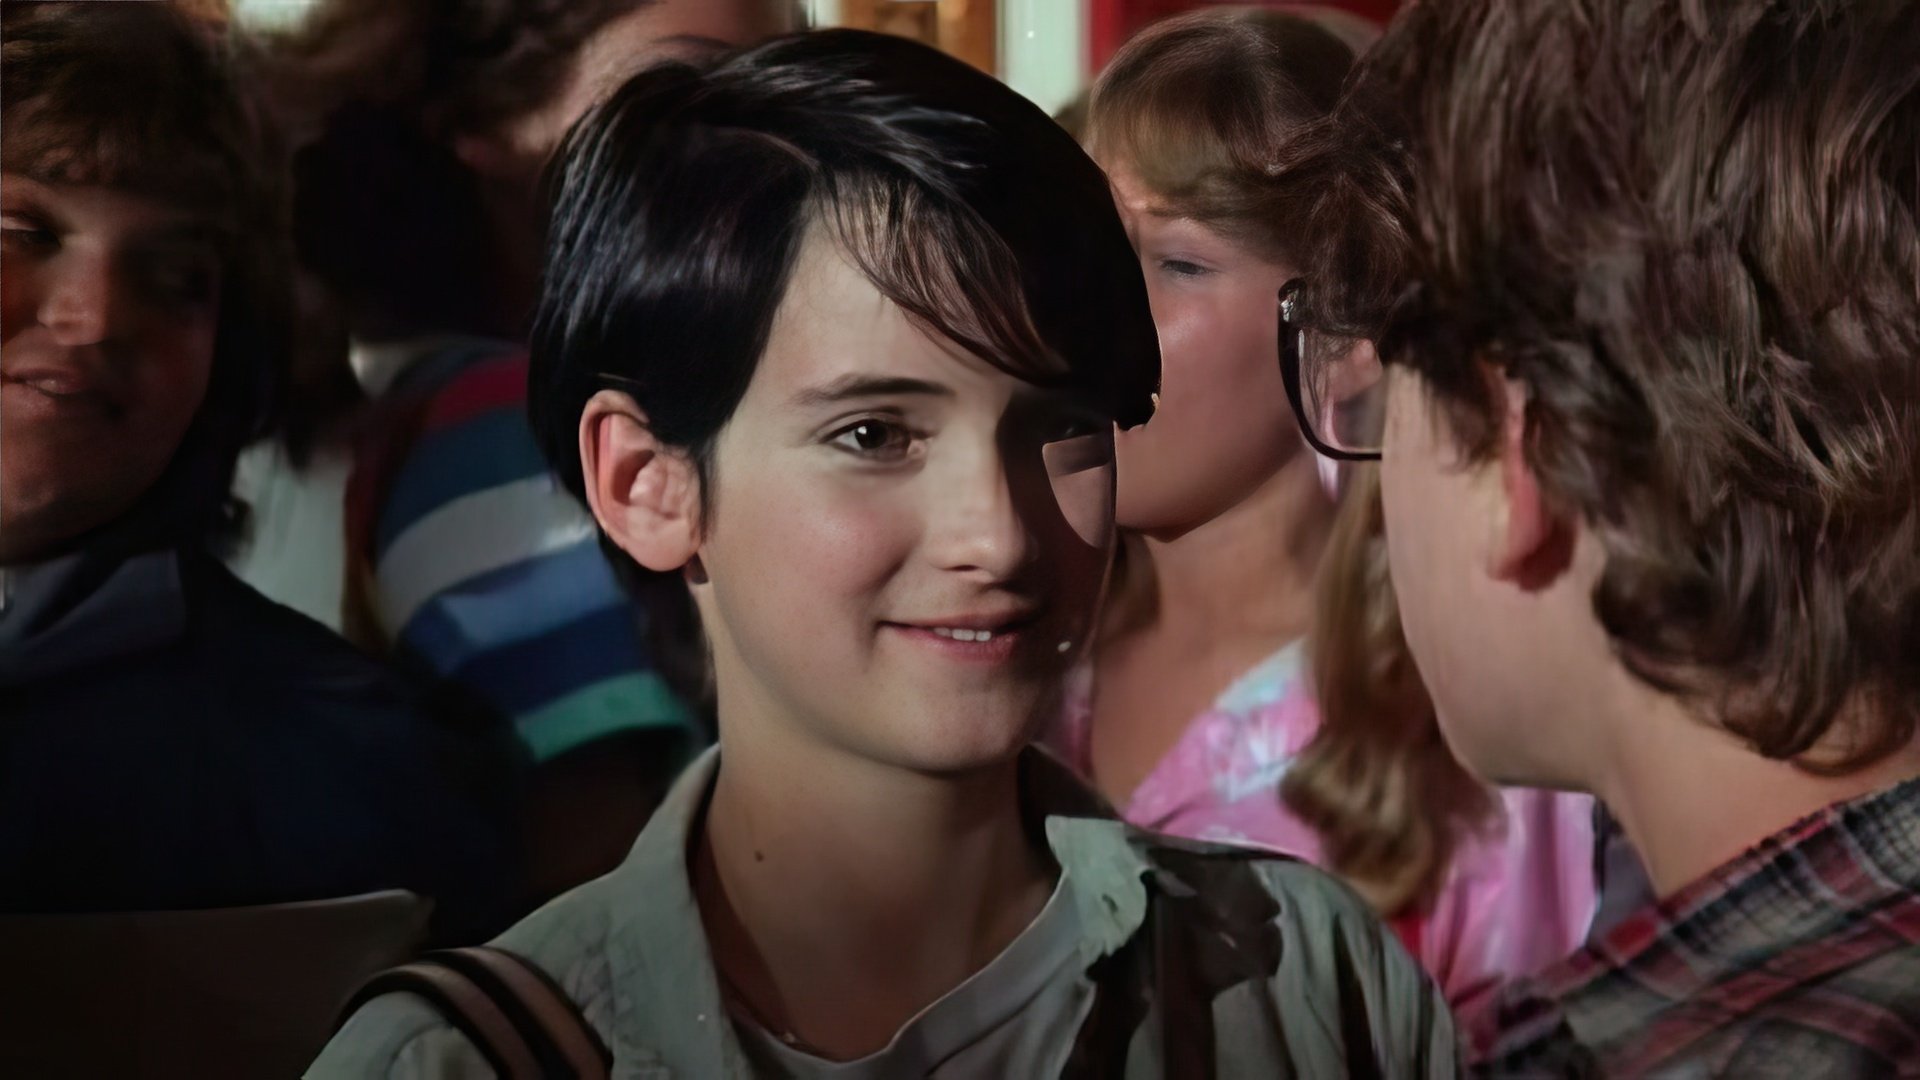 Lucas is the first Winona Ryder’s movie